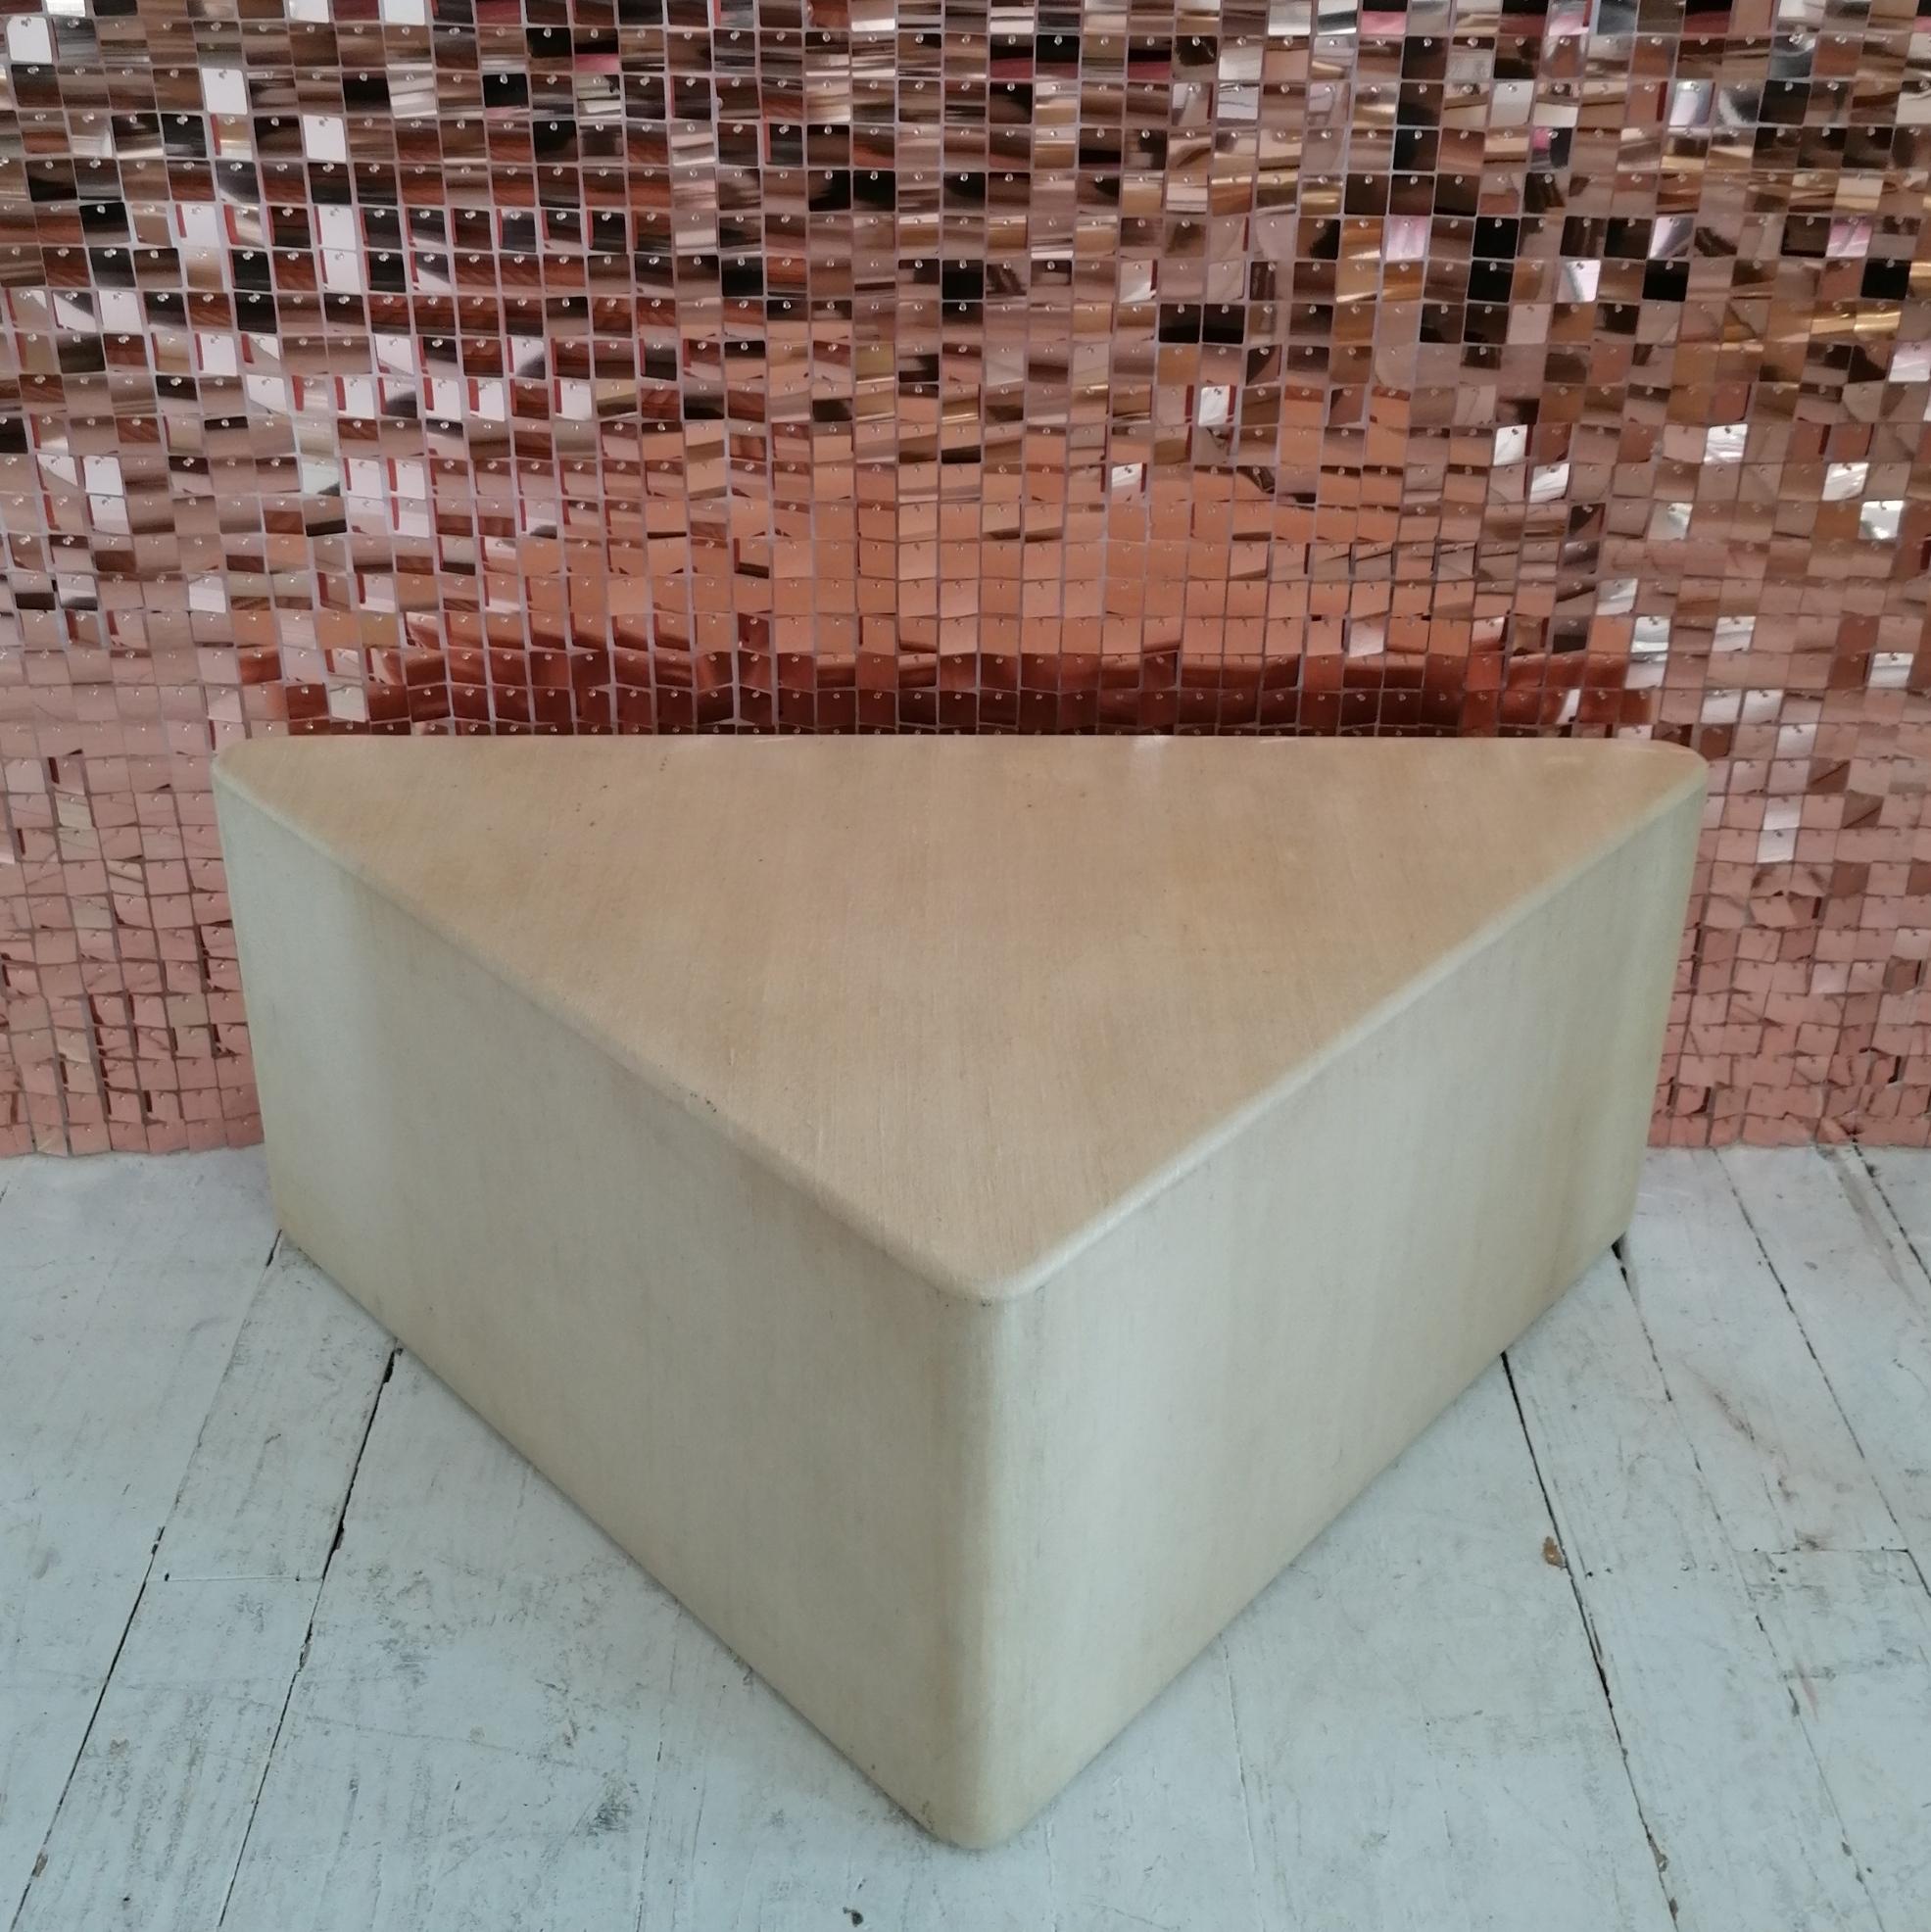 Postmodern grasscloth triangular coffee table, USA 1980s. Made from a heavyweight fiberglass material, with a grasscloth.

Dimensions: width 104cm, depth 55cm, height 41cm
